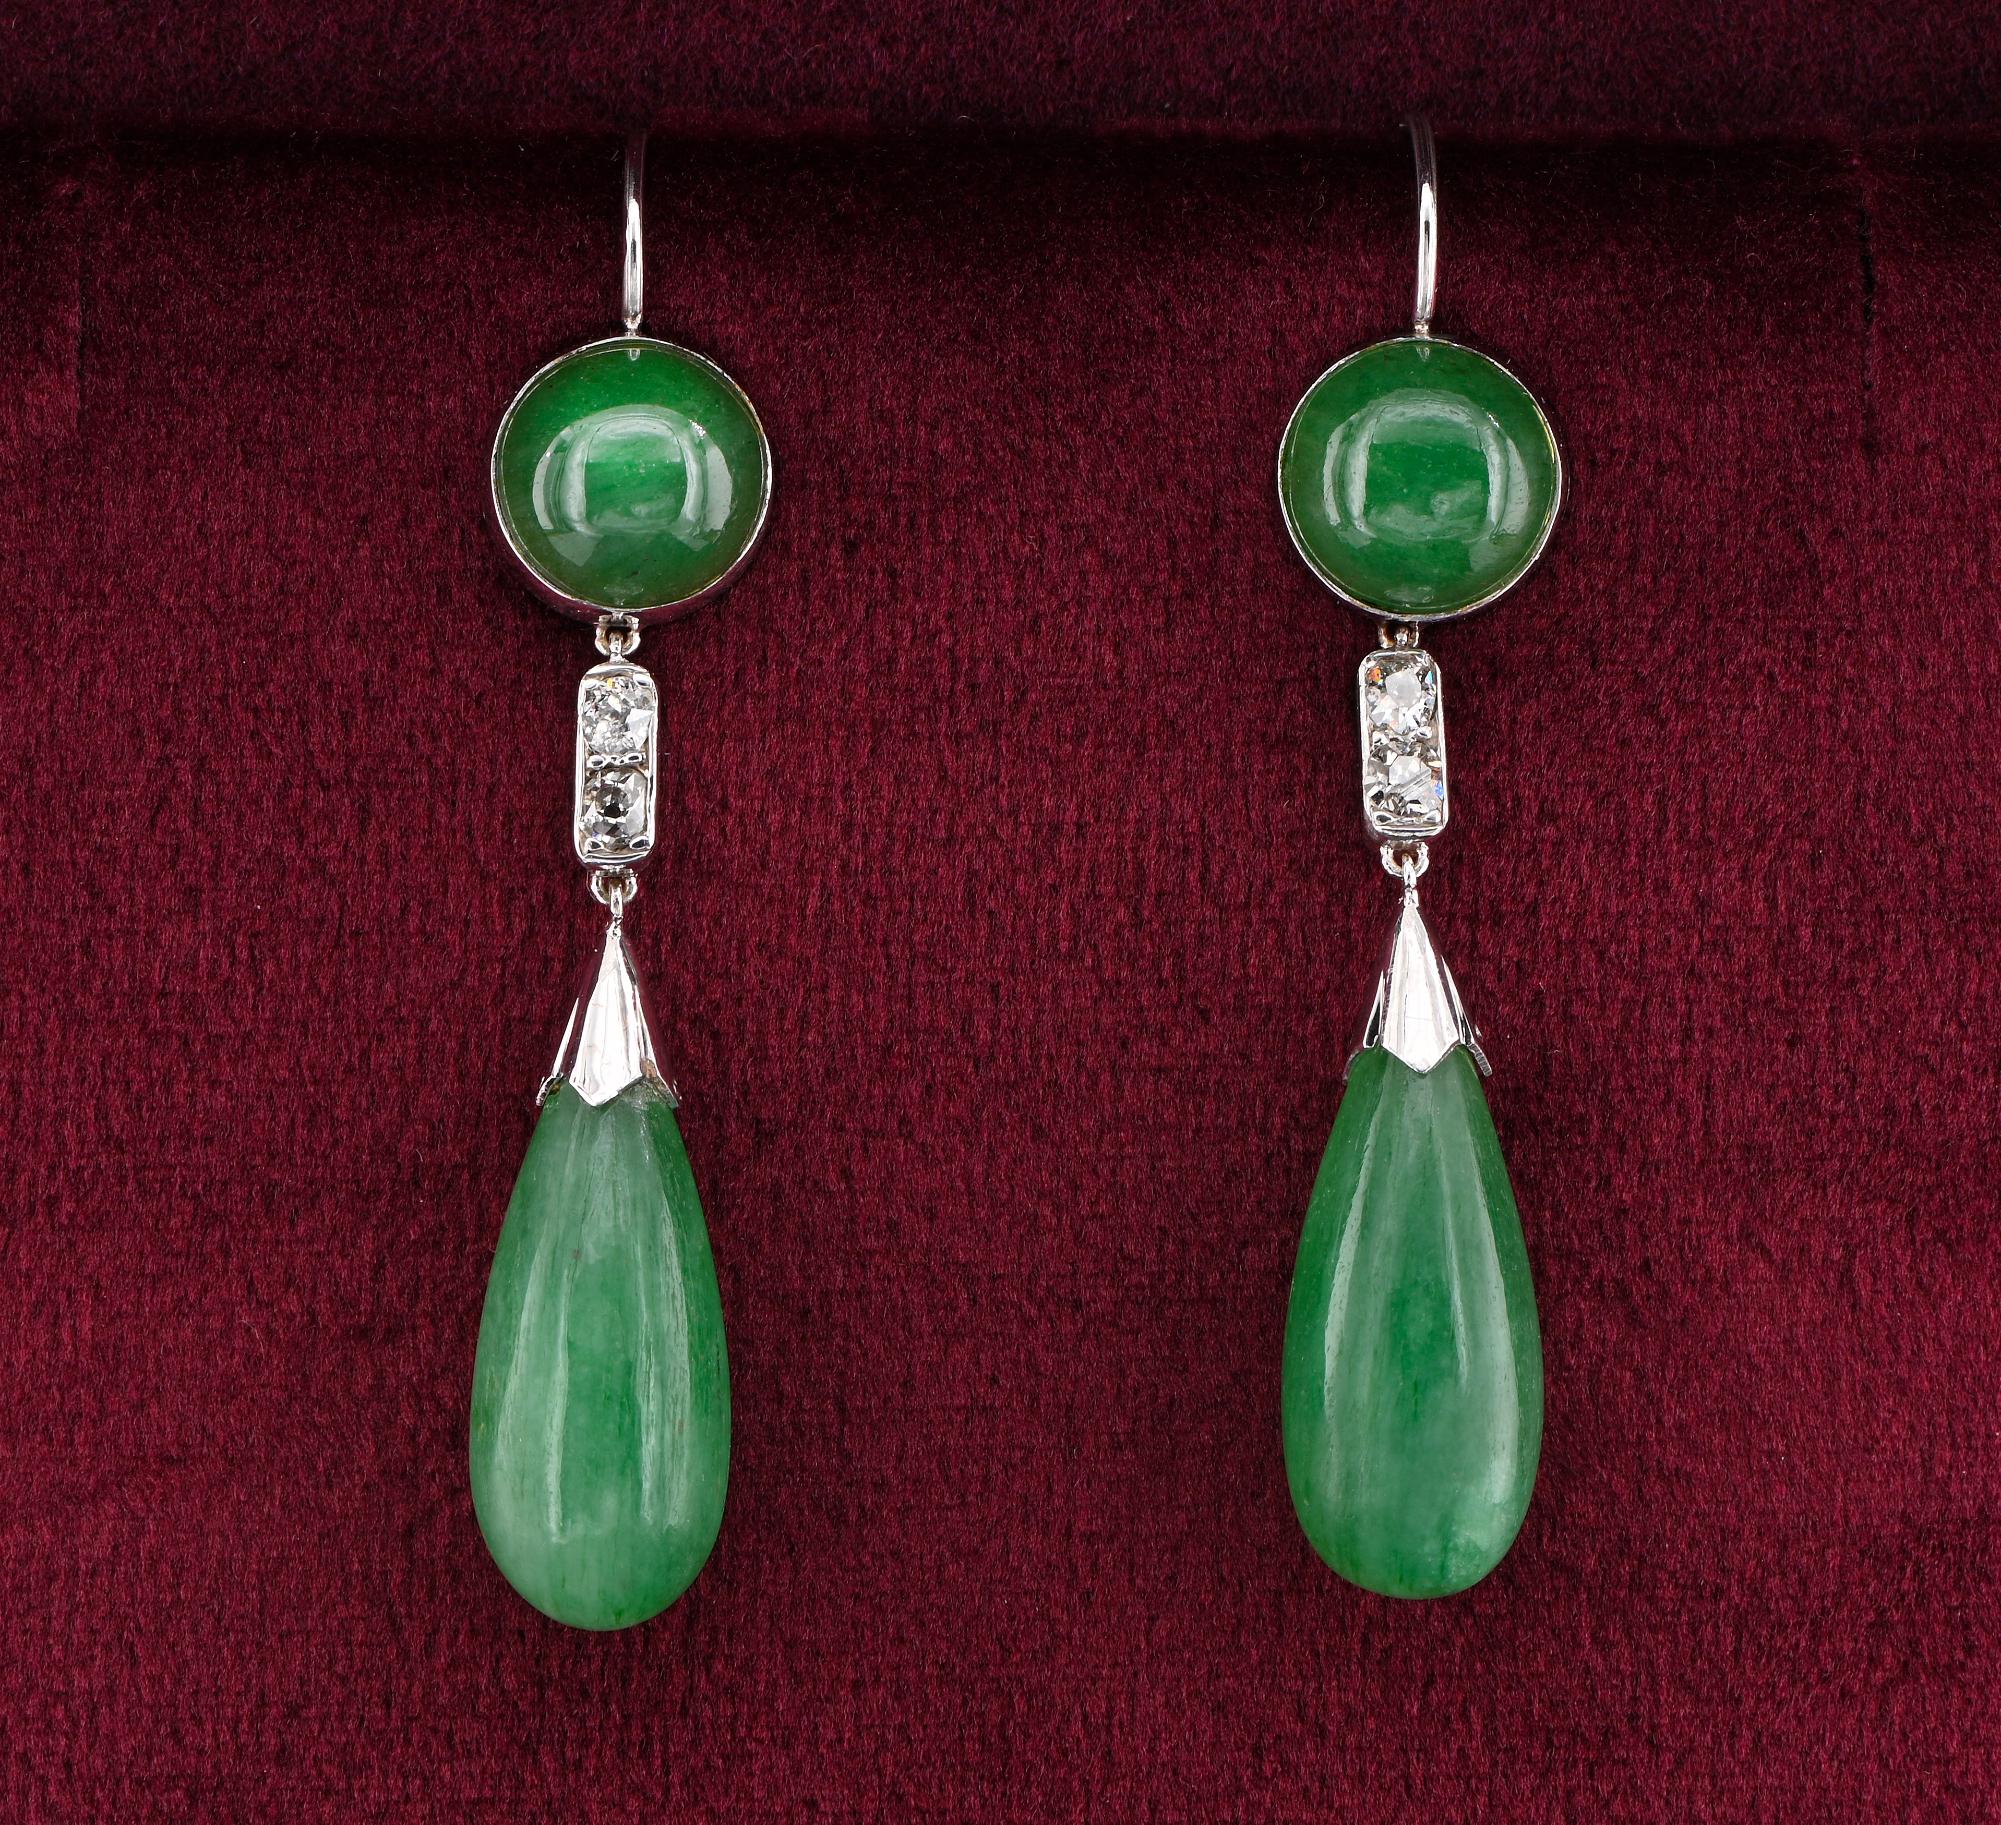 Rare Find
A good pair of authentic Art Deco earrings dating 1925 ca.
They have beautiful design simply made out by the Emeralds alone and Diamond link connecting top from bottom, hand made during the period of solid 18 KT white gold
They contain